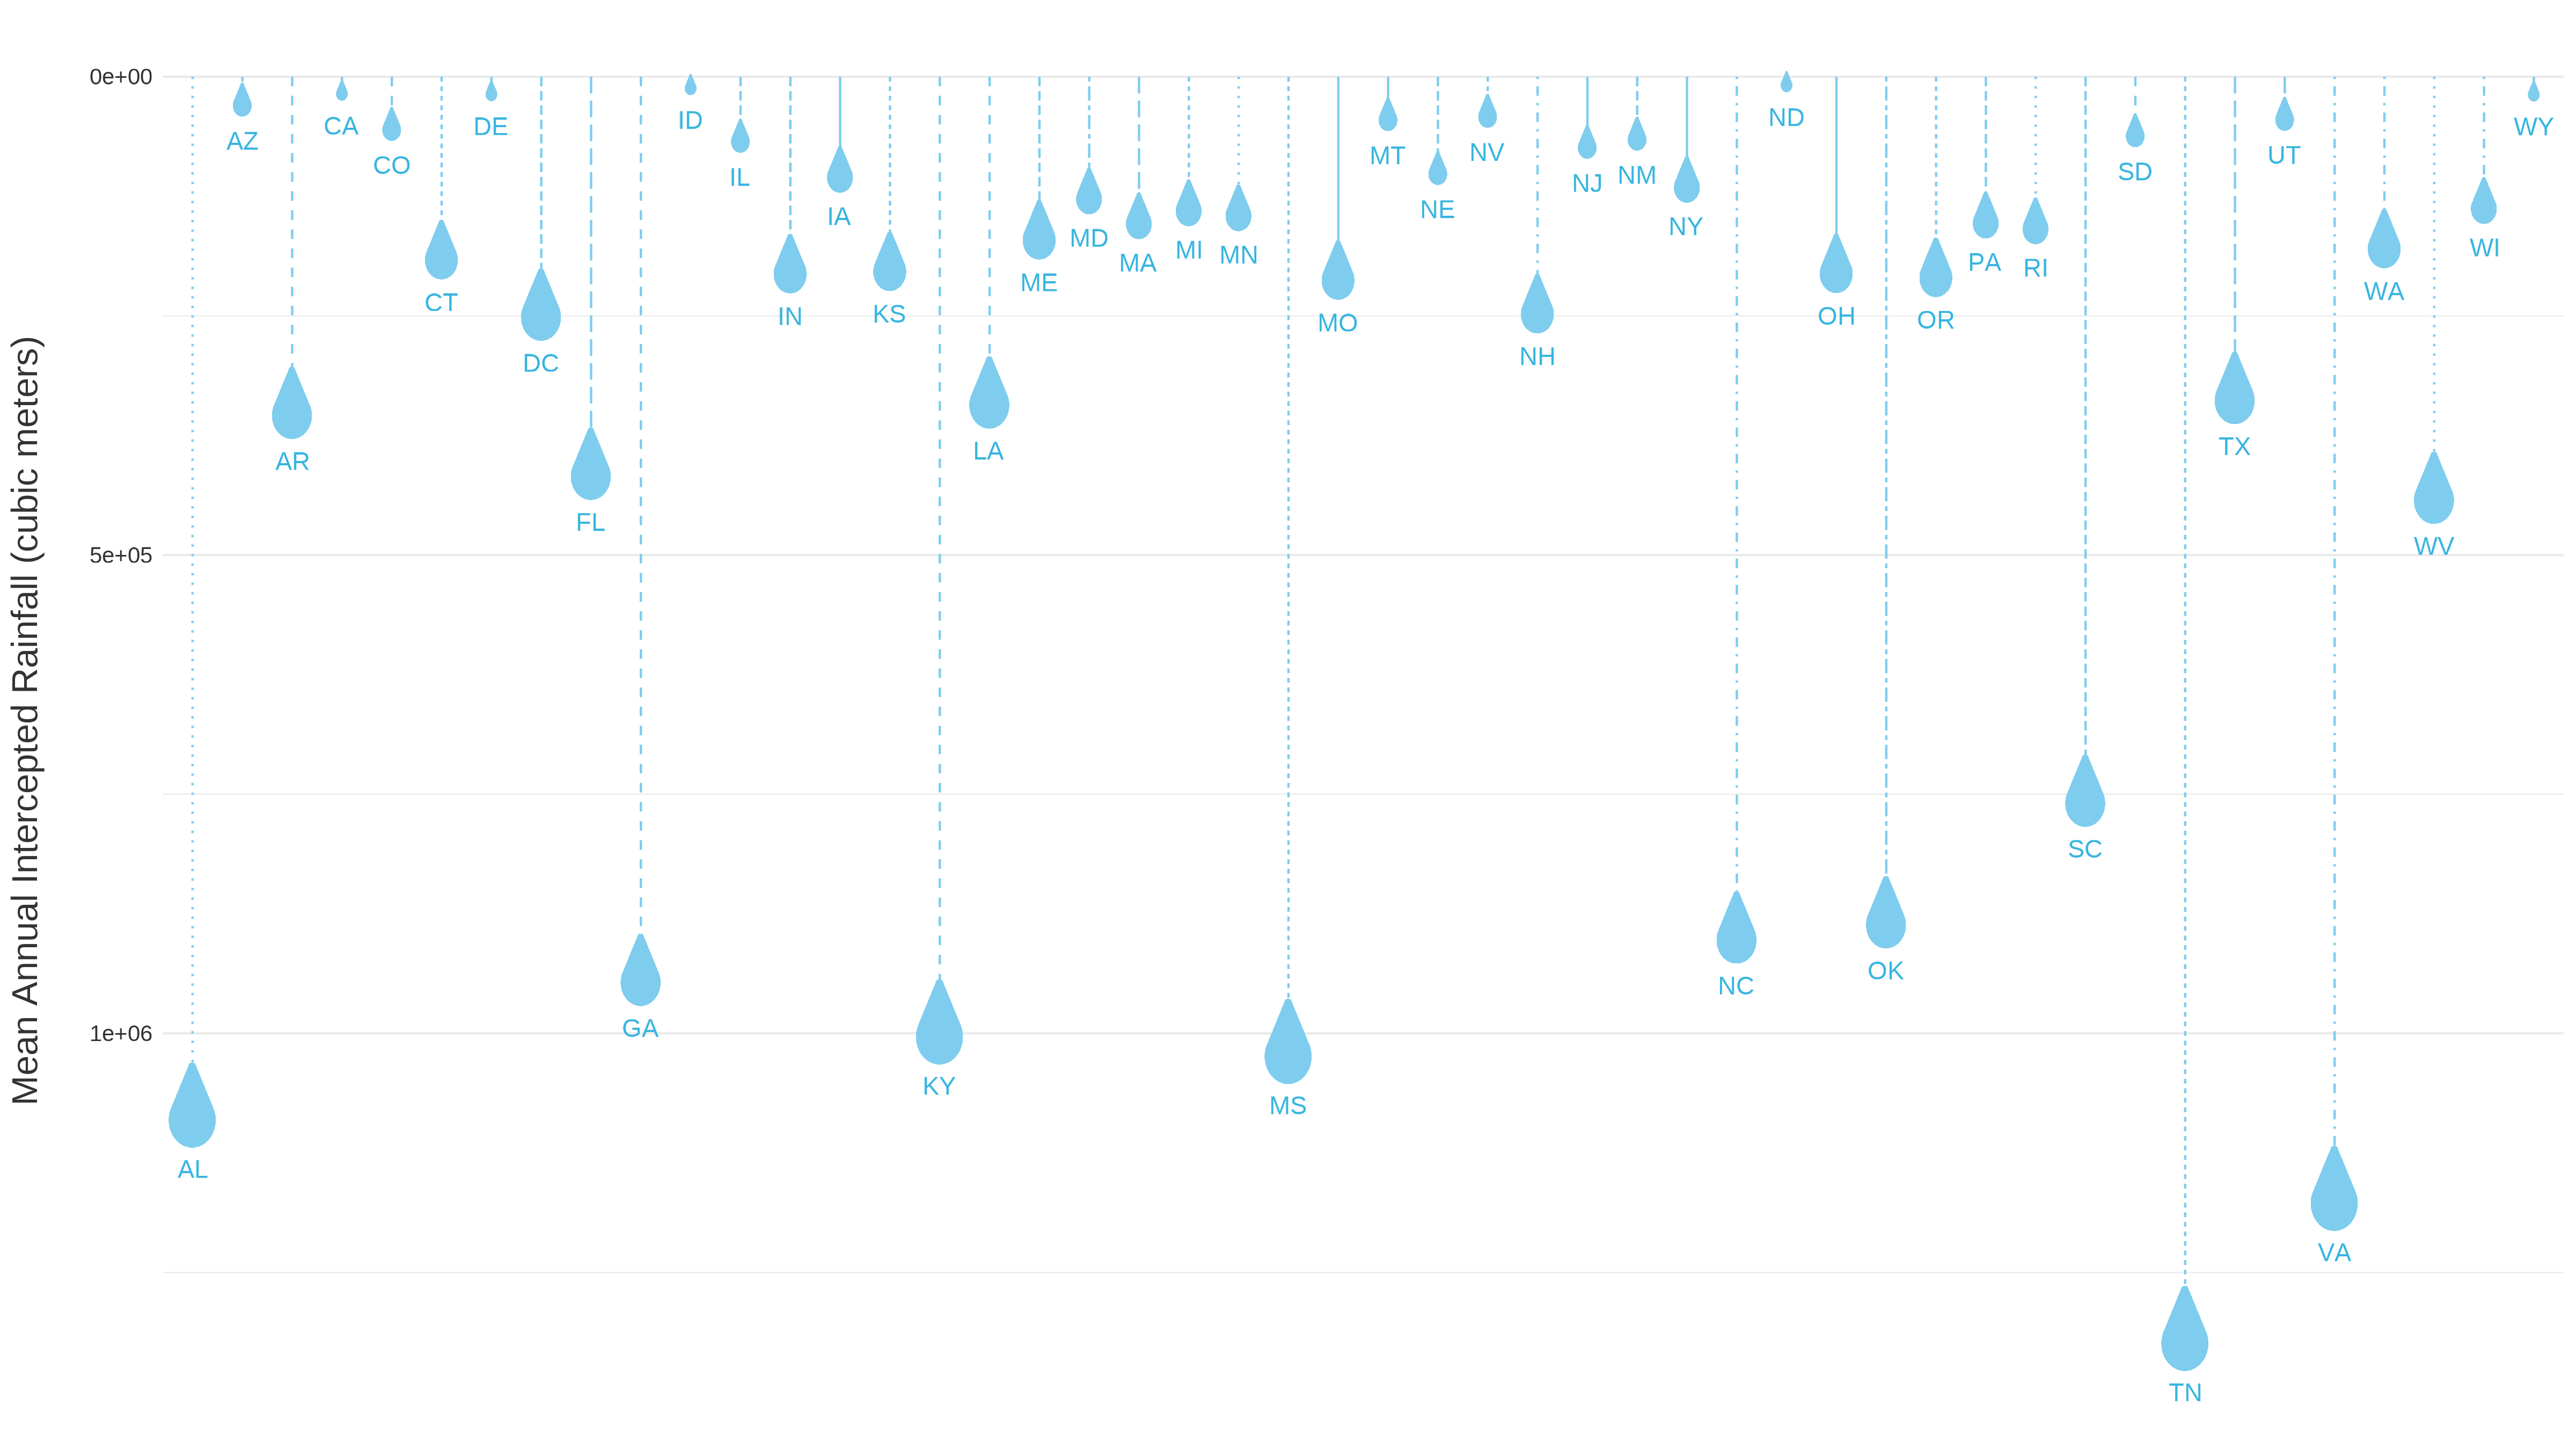 Scatter plot with raindrop points showing mean annual intercepted rainfall (cubic meters) across CONUS. States with relatively lower values of rainfall interception would are dsignated by small raindrop icons and larger values are designated by larger raindrop icons.